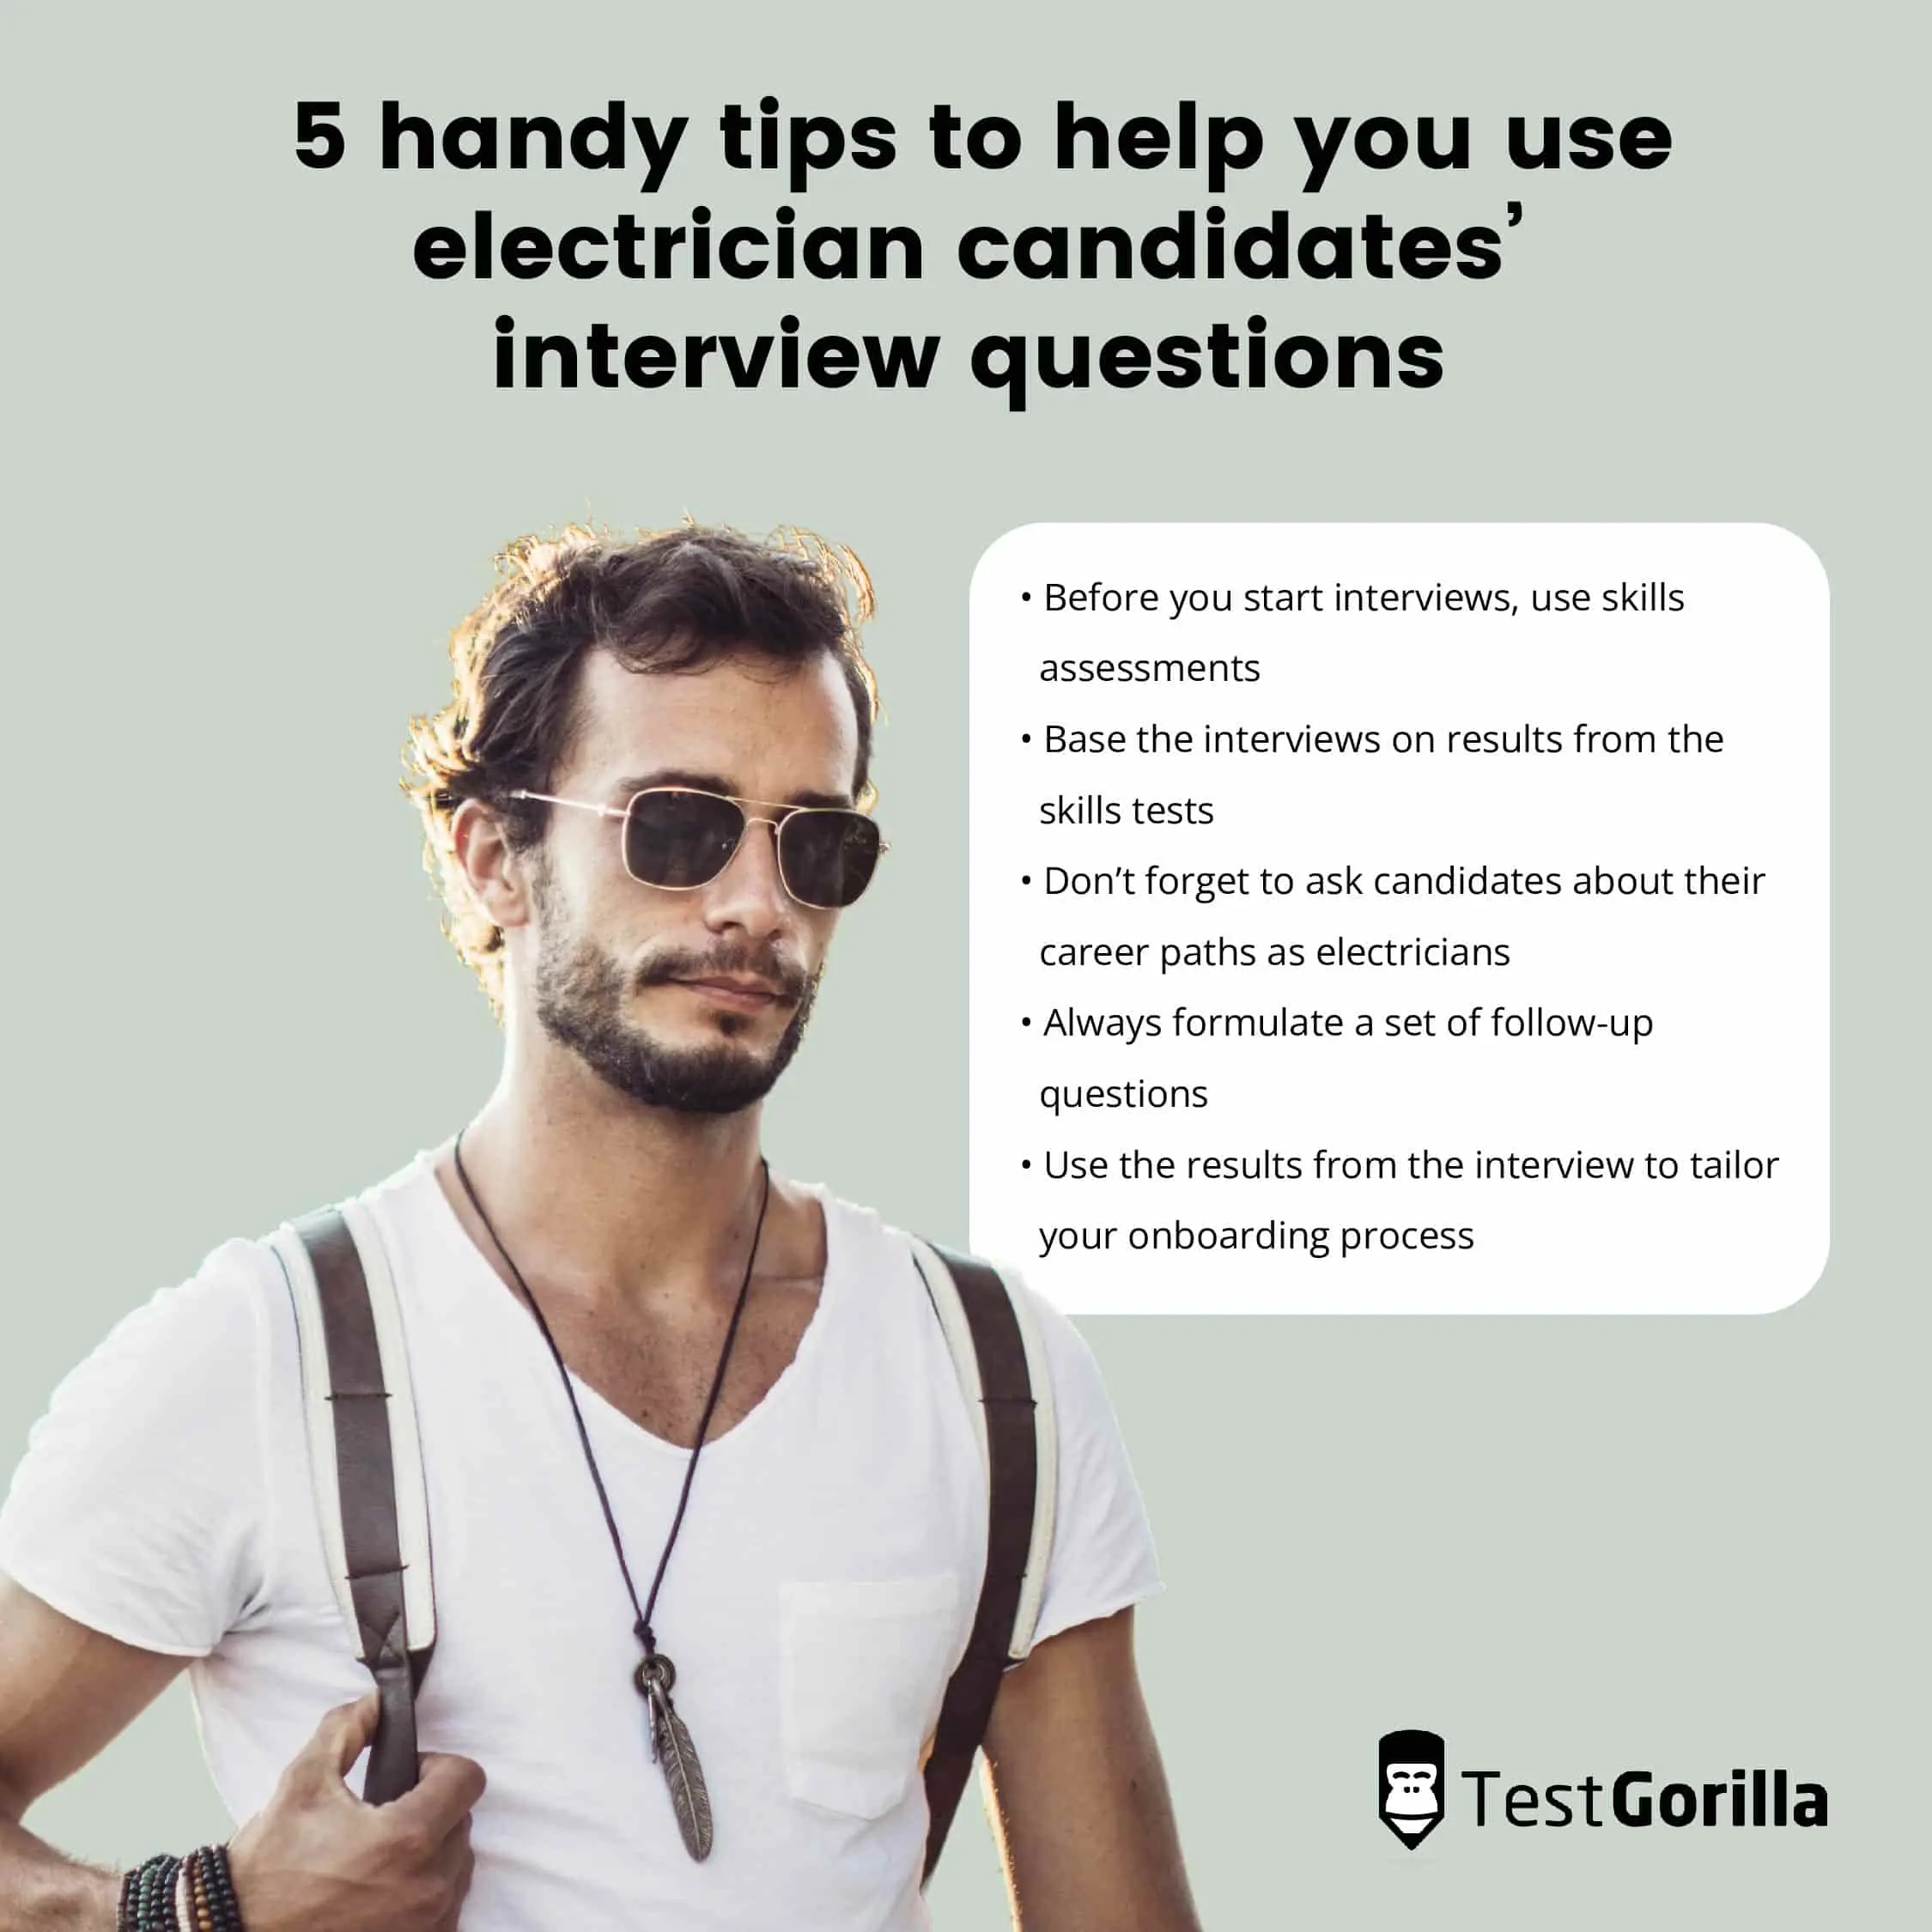 banner image for 5 handy tips to help you use electrician candidates’ interview questions